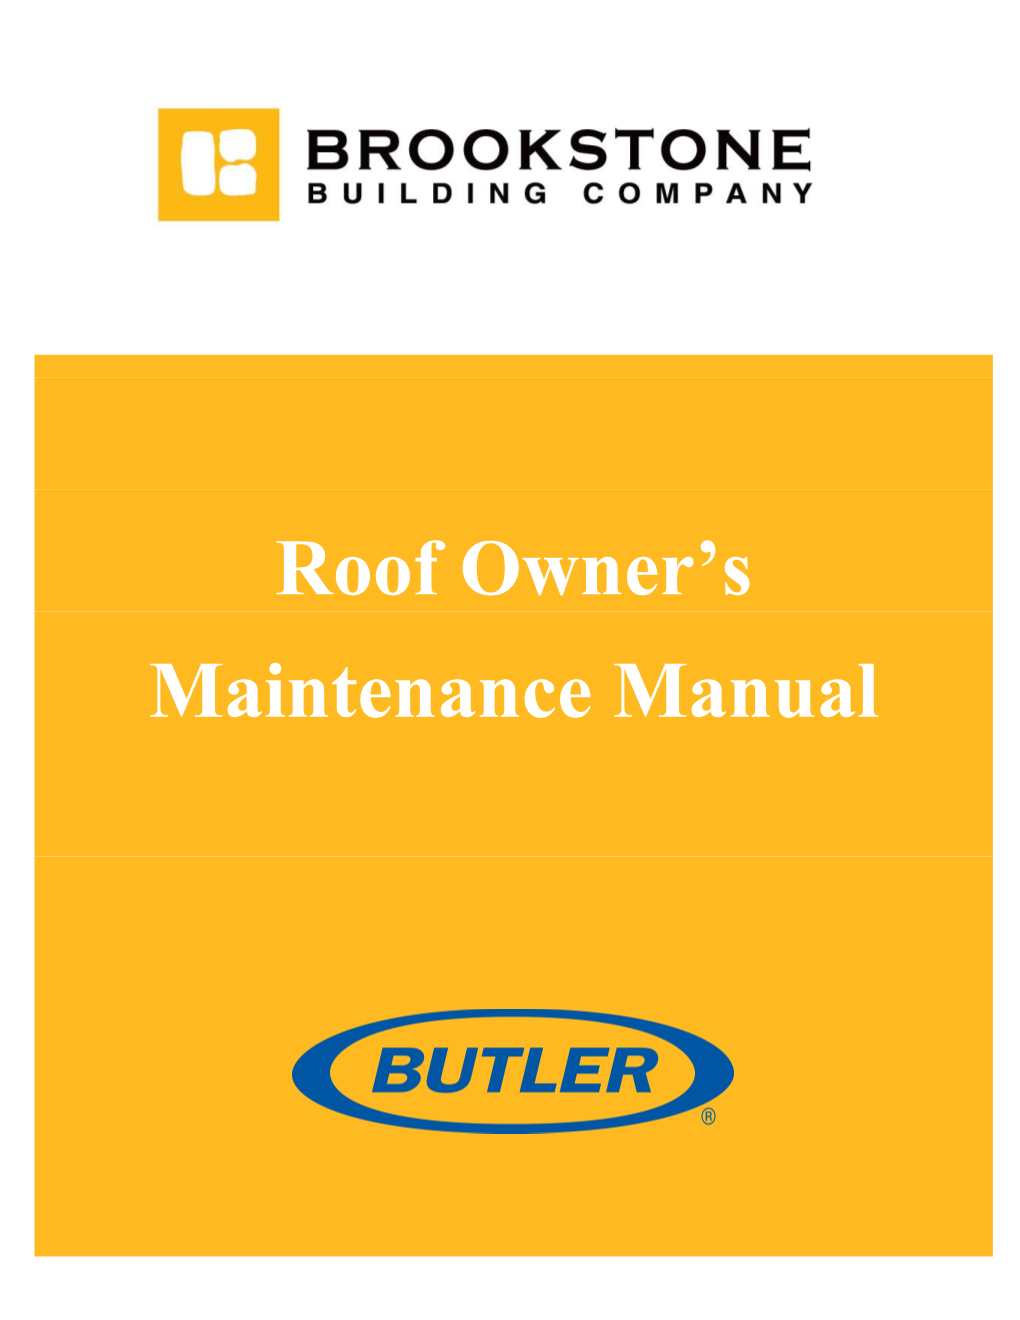 Now That Your New Butler Roof System Is Complete, Brookstone Building Company Wishes To